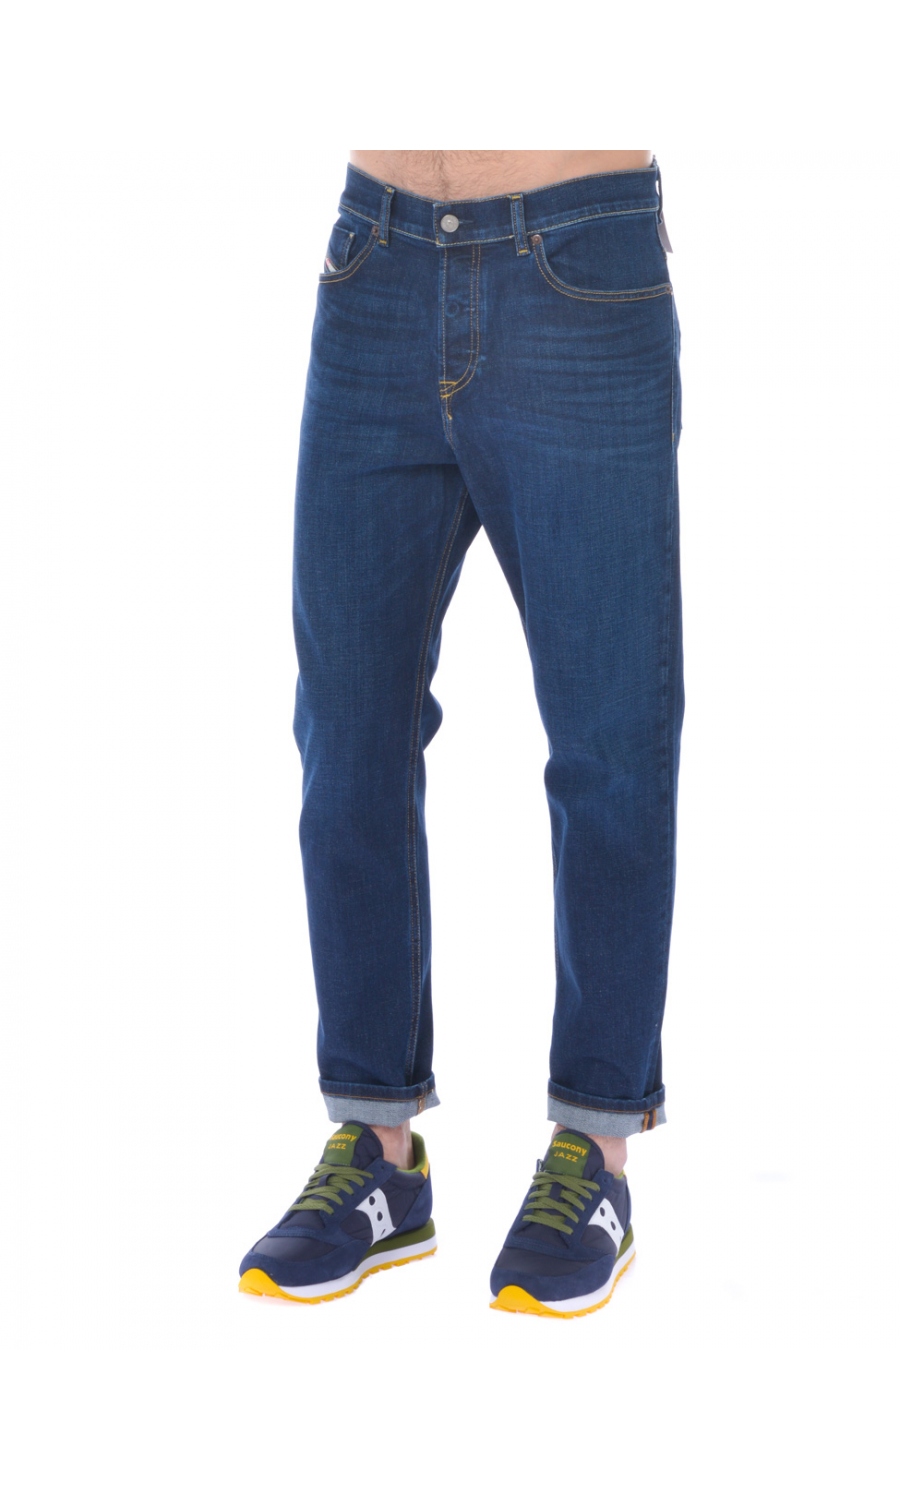 jeans da uomo Diesel stone washed cuciture in contrasto